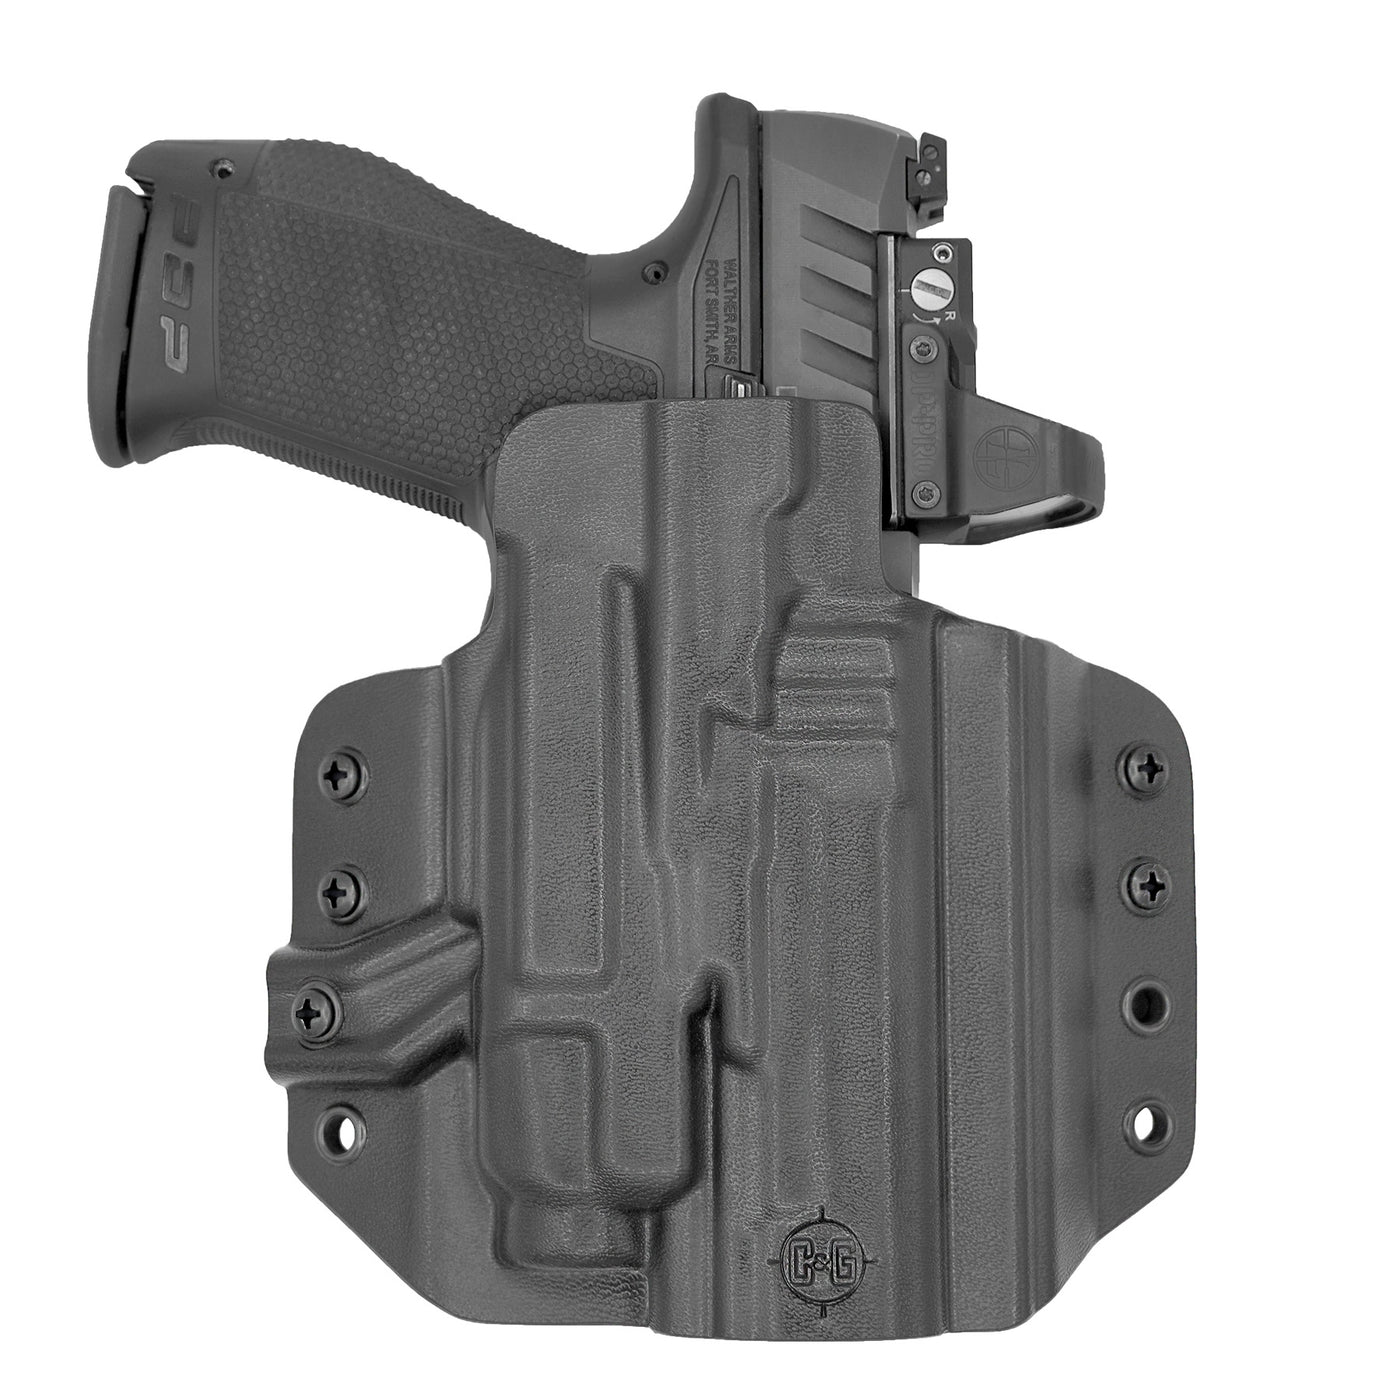 C&G Holsters quickship OWB Tactical CZ P07/09 Streamlight TLR7/a in holstered position